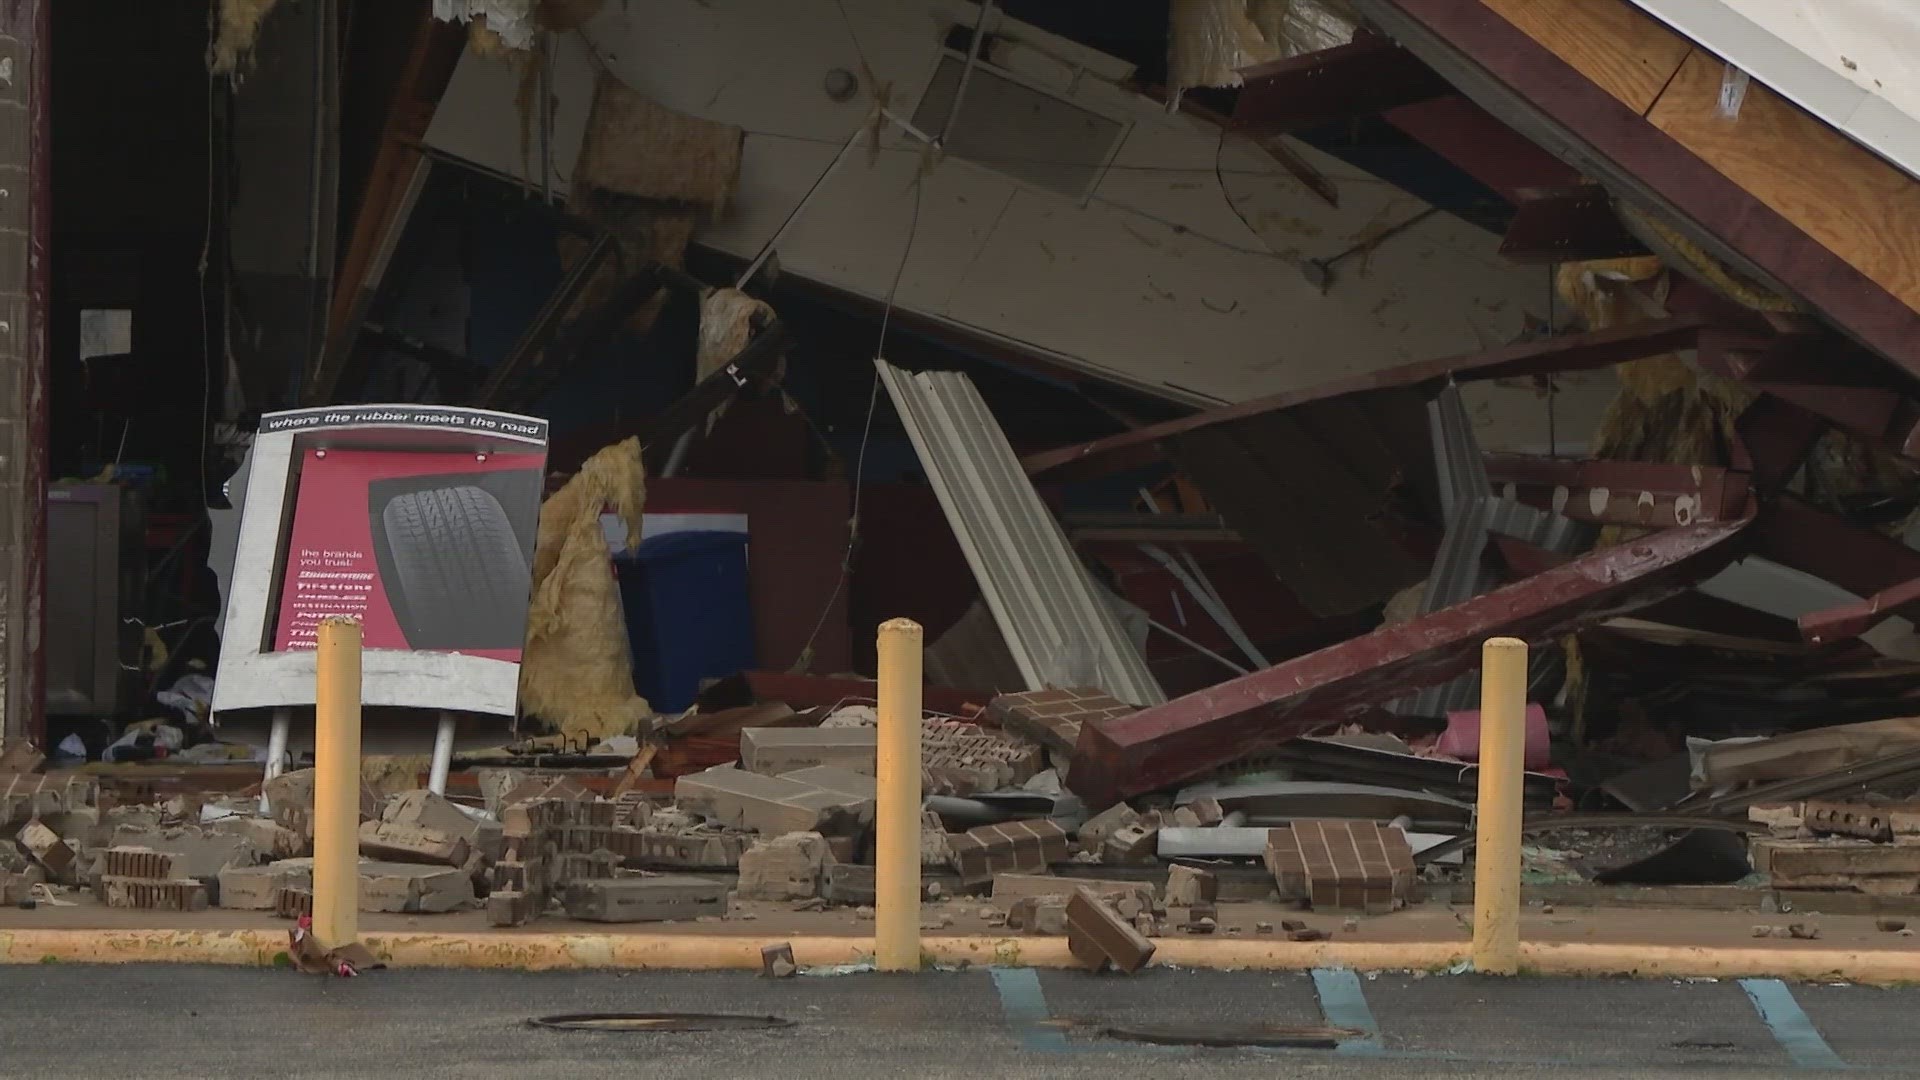 An NWS official said the tornado was an EF-1 with maximum winds up to 90 mph and did not have much of a track.